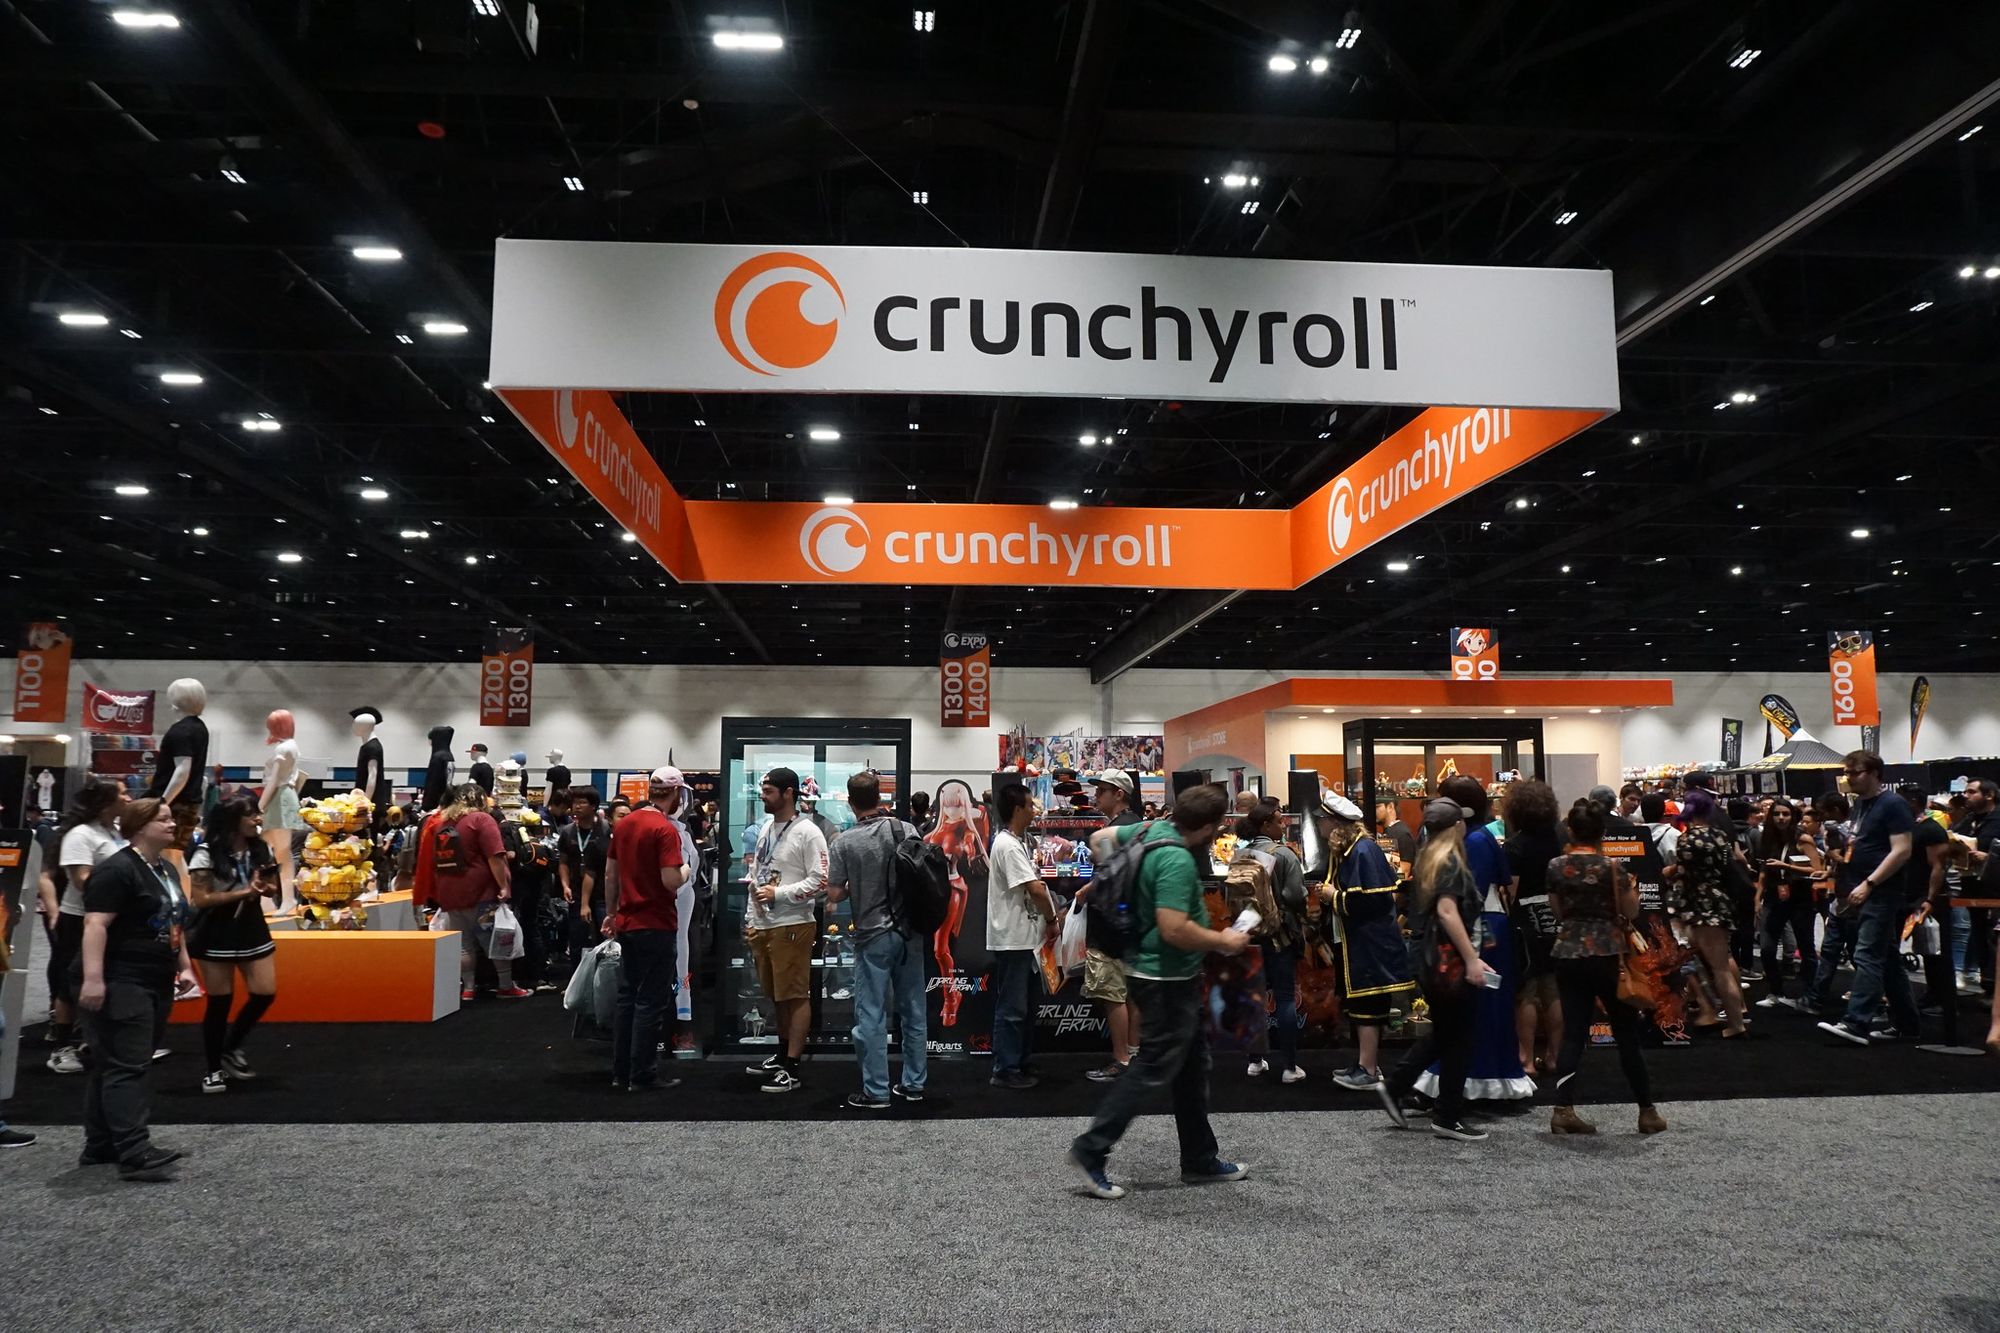 Crunchyroll unblocker: How to use a VPN to unblock anime shows